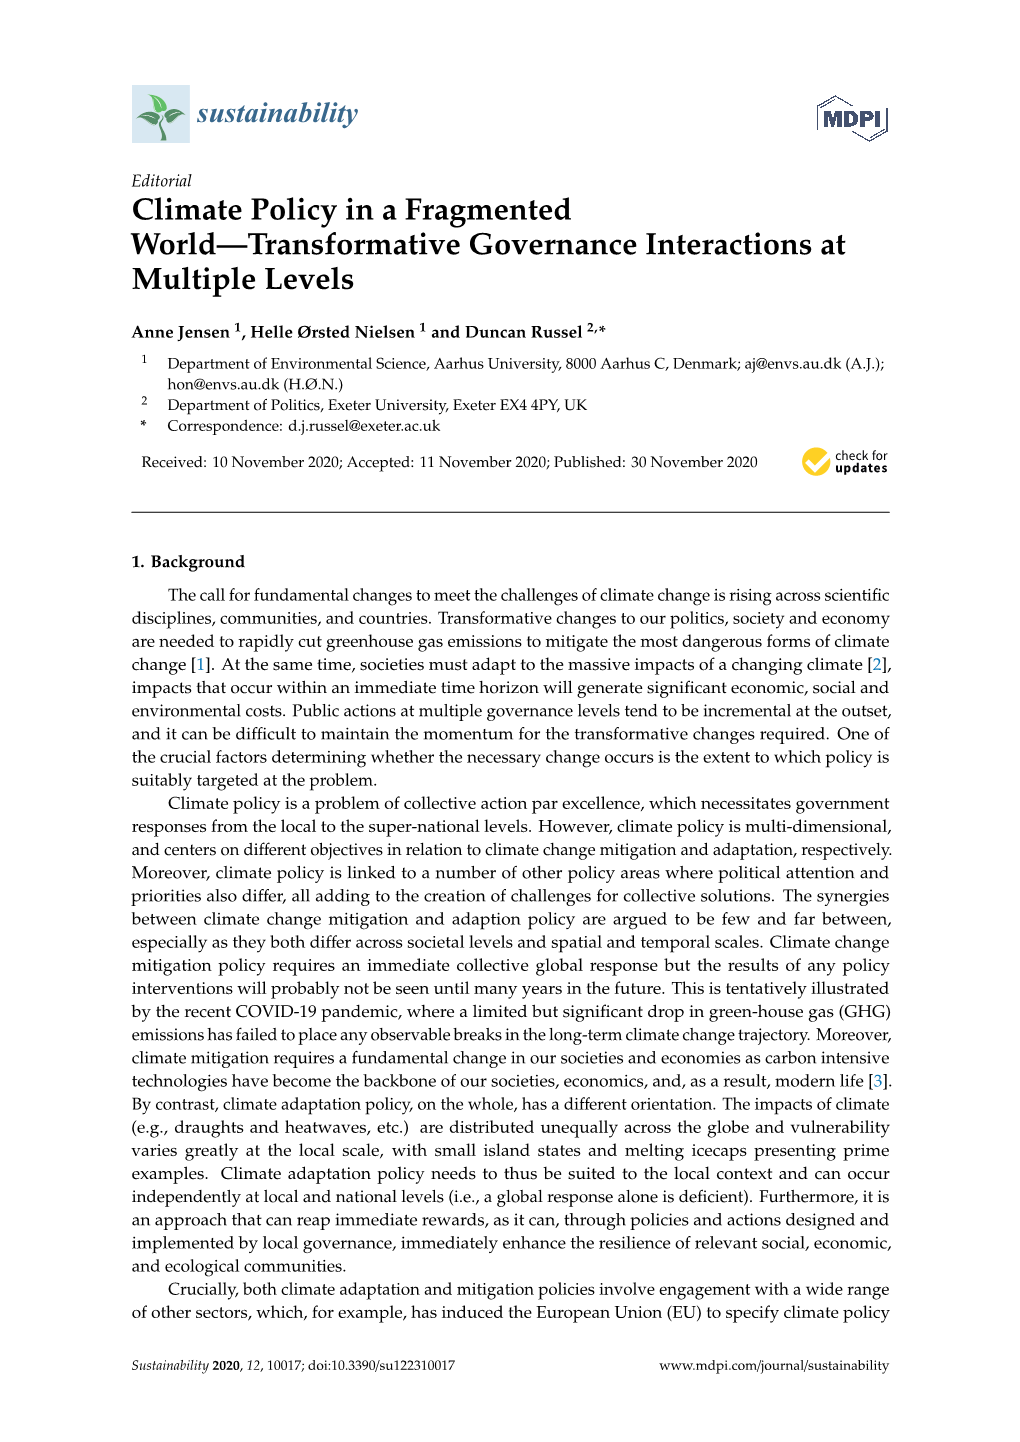 Climate Policy in a Fragmented World—Transformative Governance Interactions at Multiple Levels